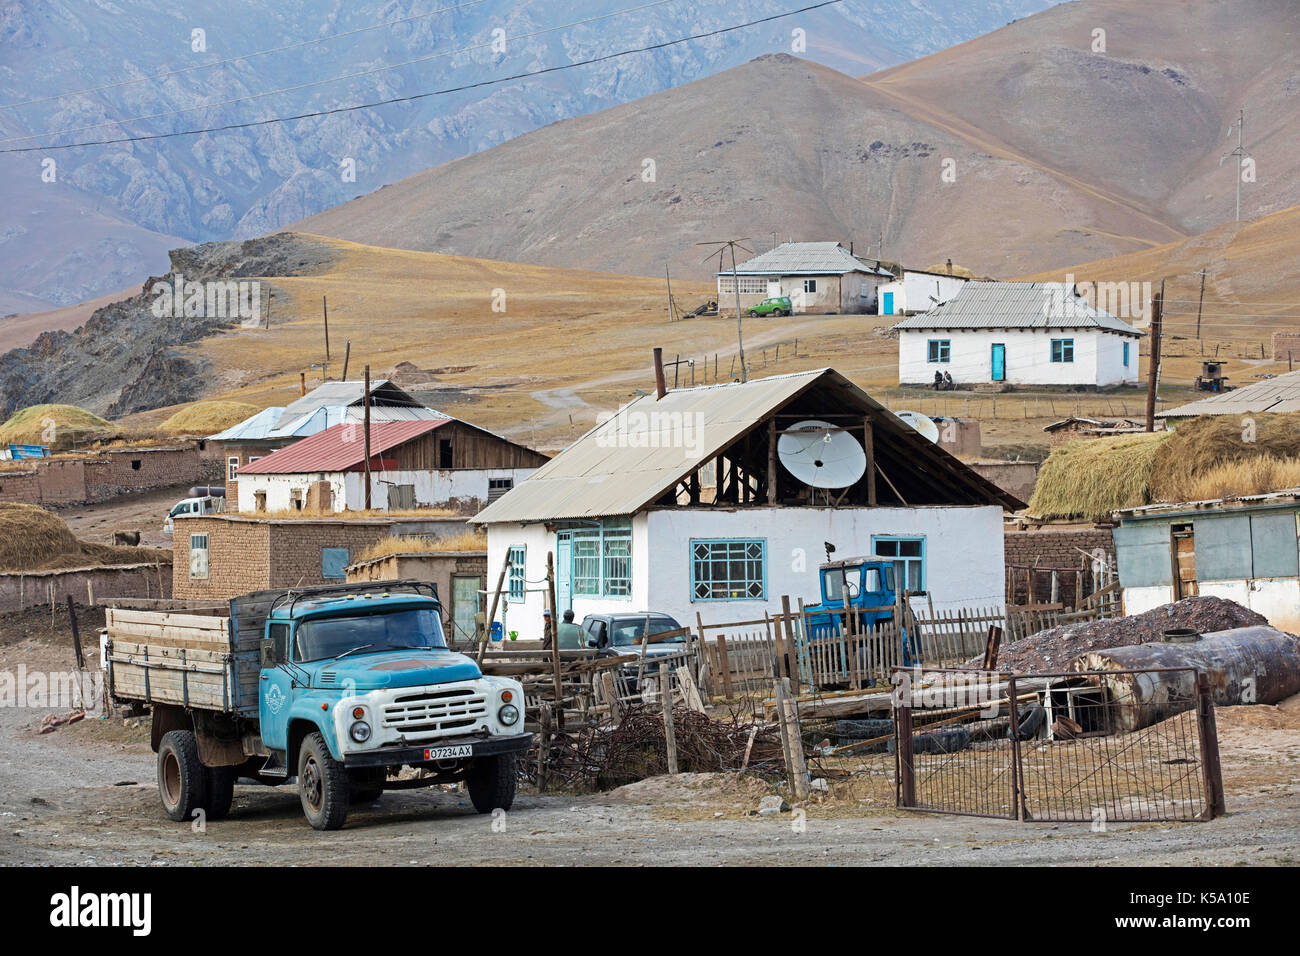 Old truck and houses in the small rural village Sary-Tash in the Alay Valley of Osh Region, Kyrgyzstan Stock Photo